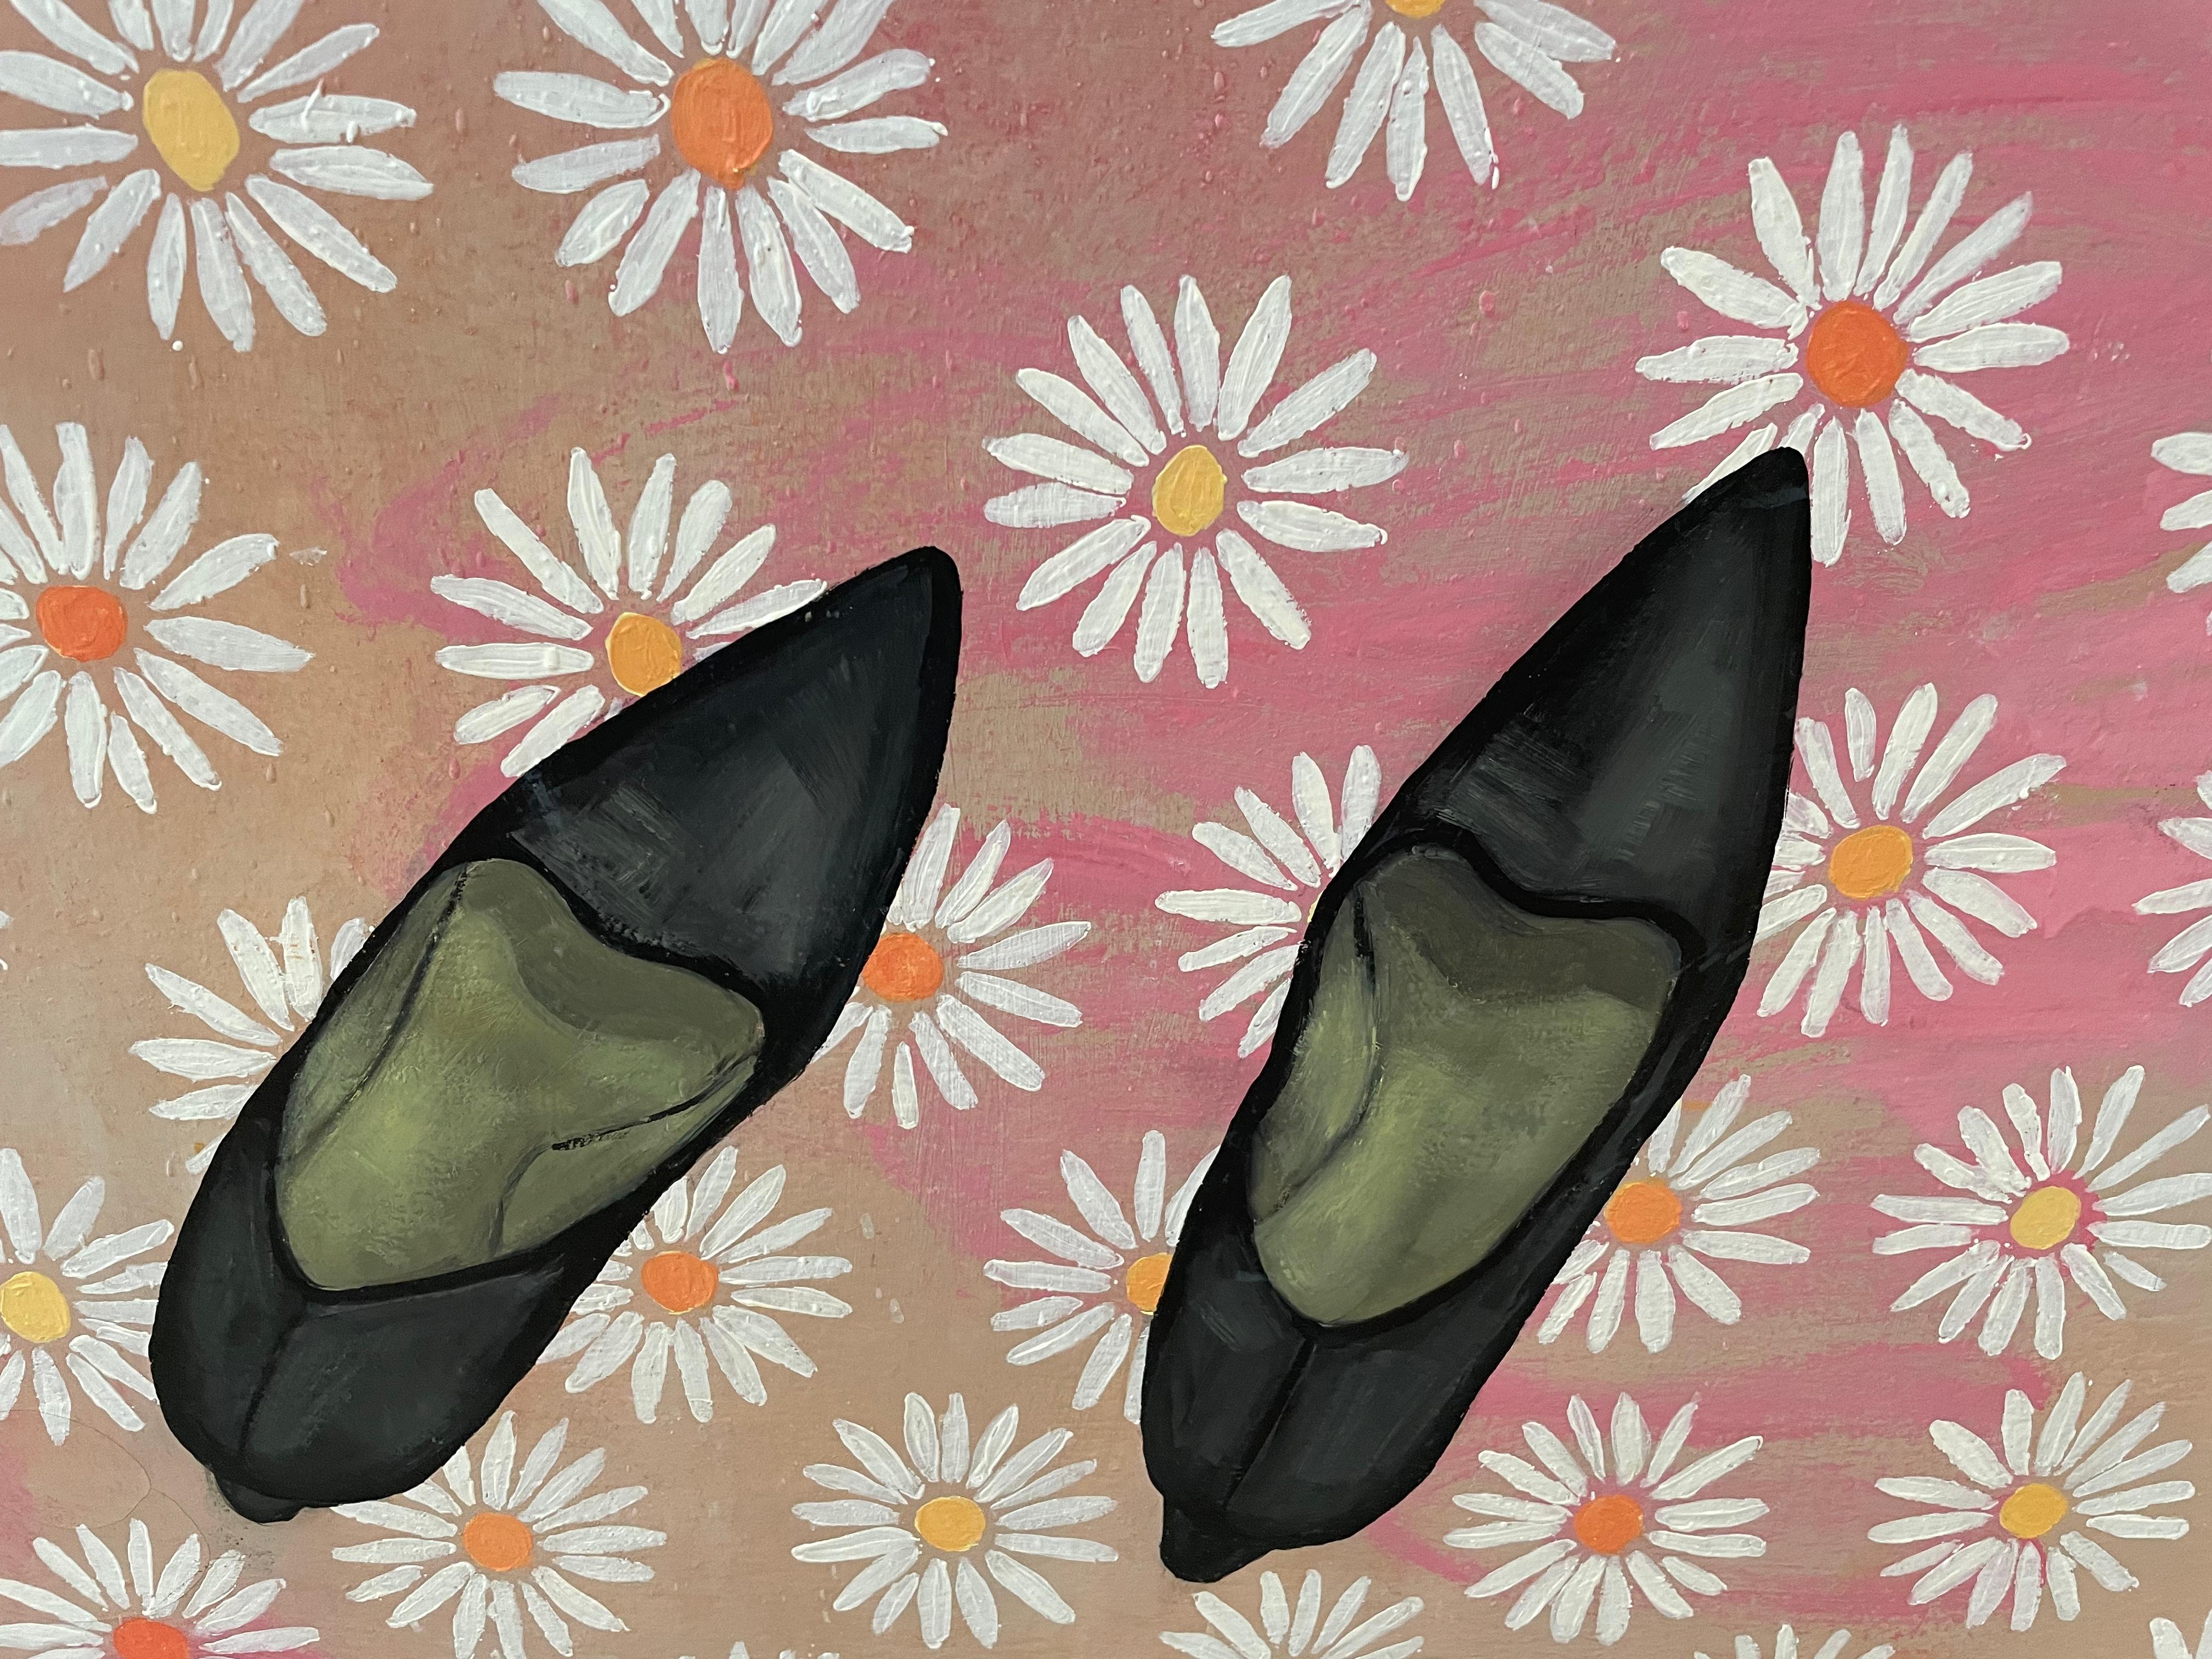 Modern Large Whimisical Painting on Canvas with Daisies and Slippers by Lorraine Peltz